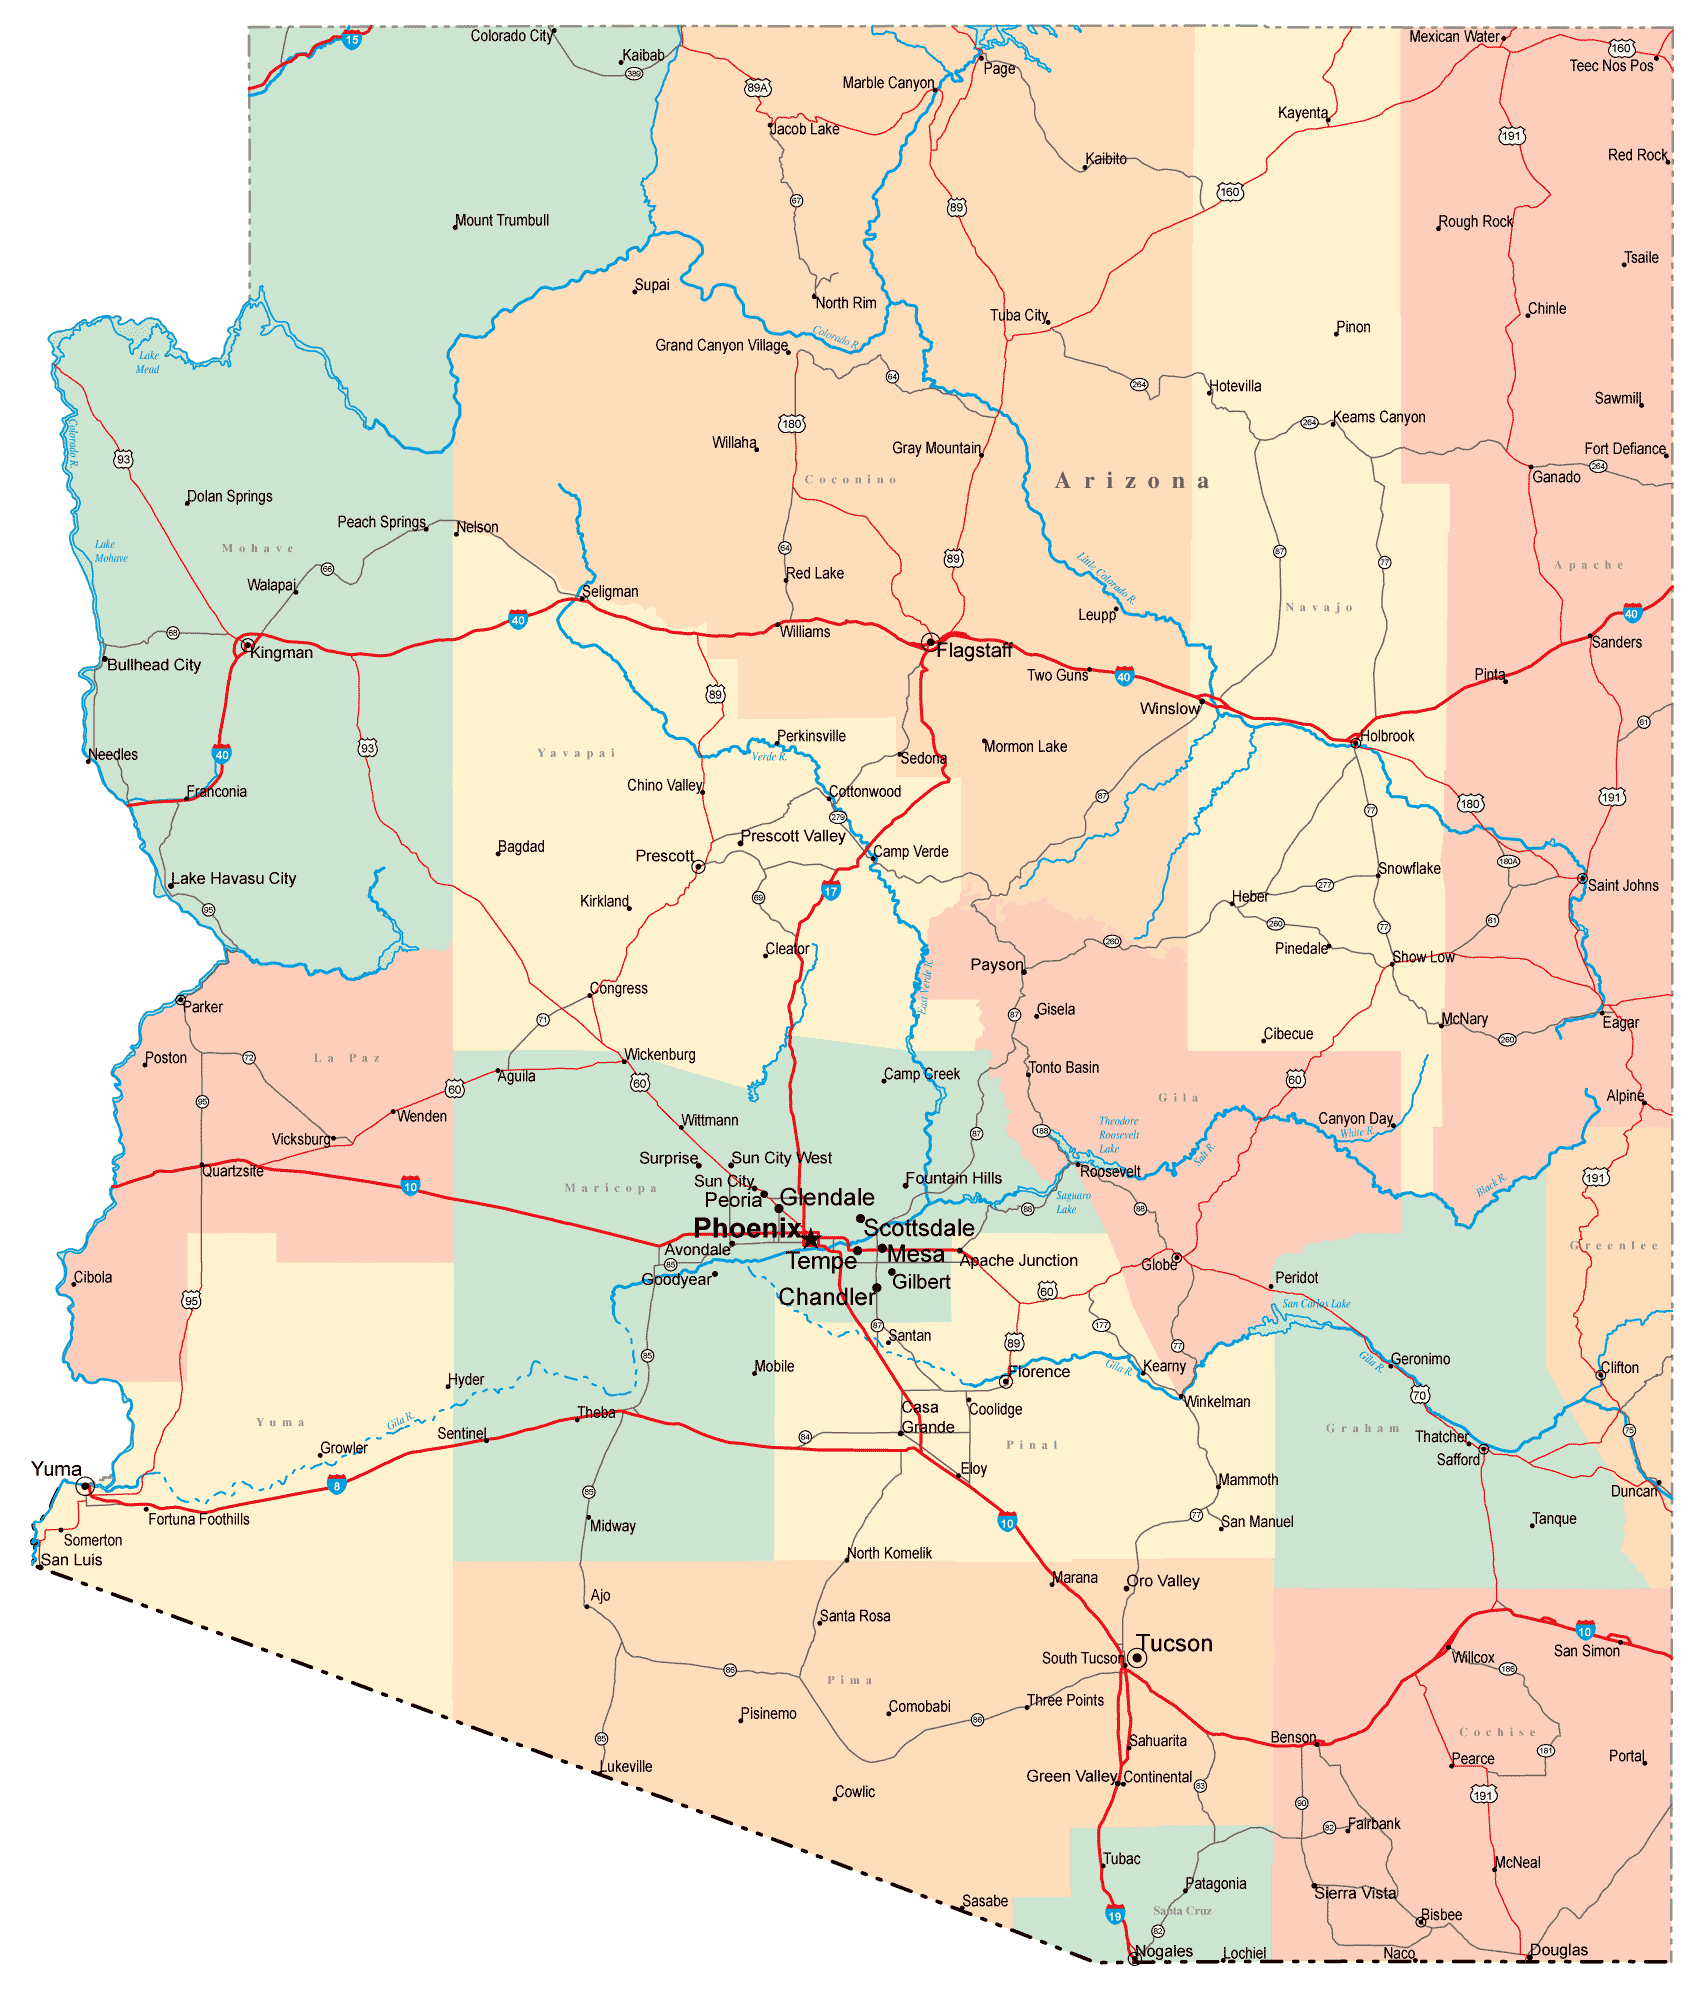 Detailed Political Map Of Arizona And Arizona Details Map Images And